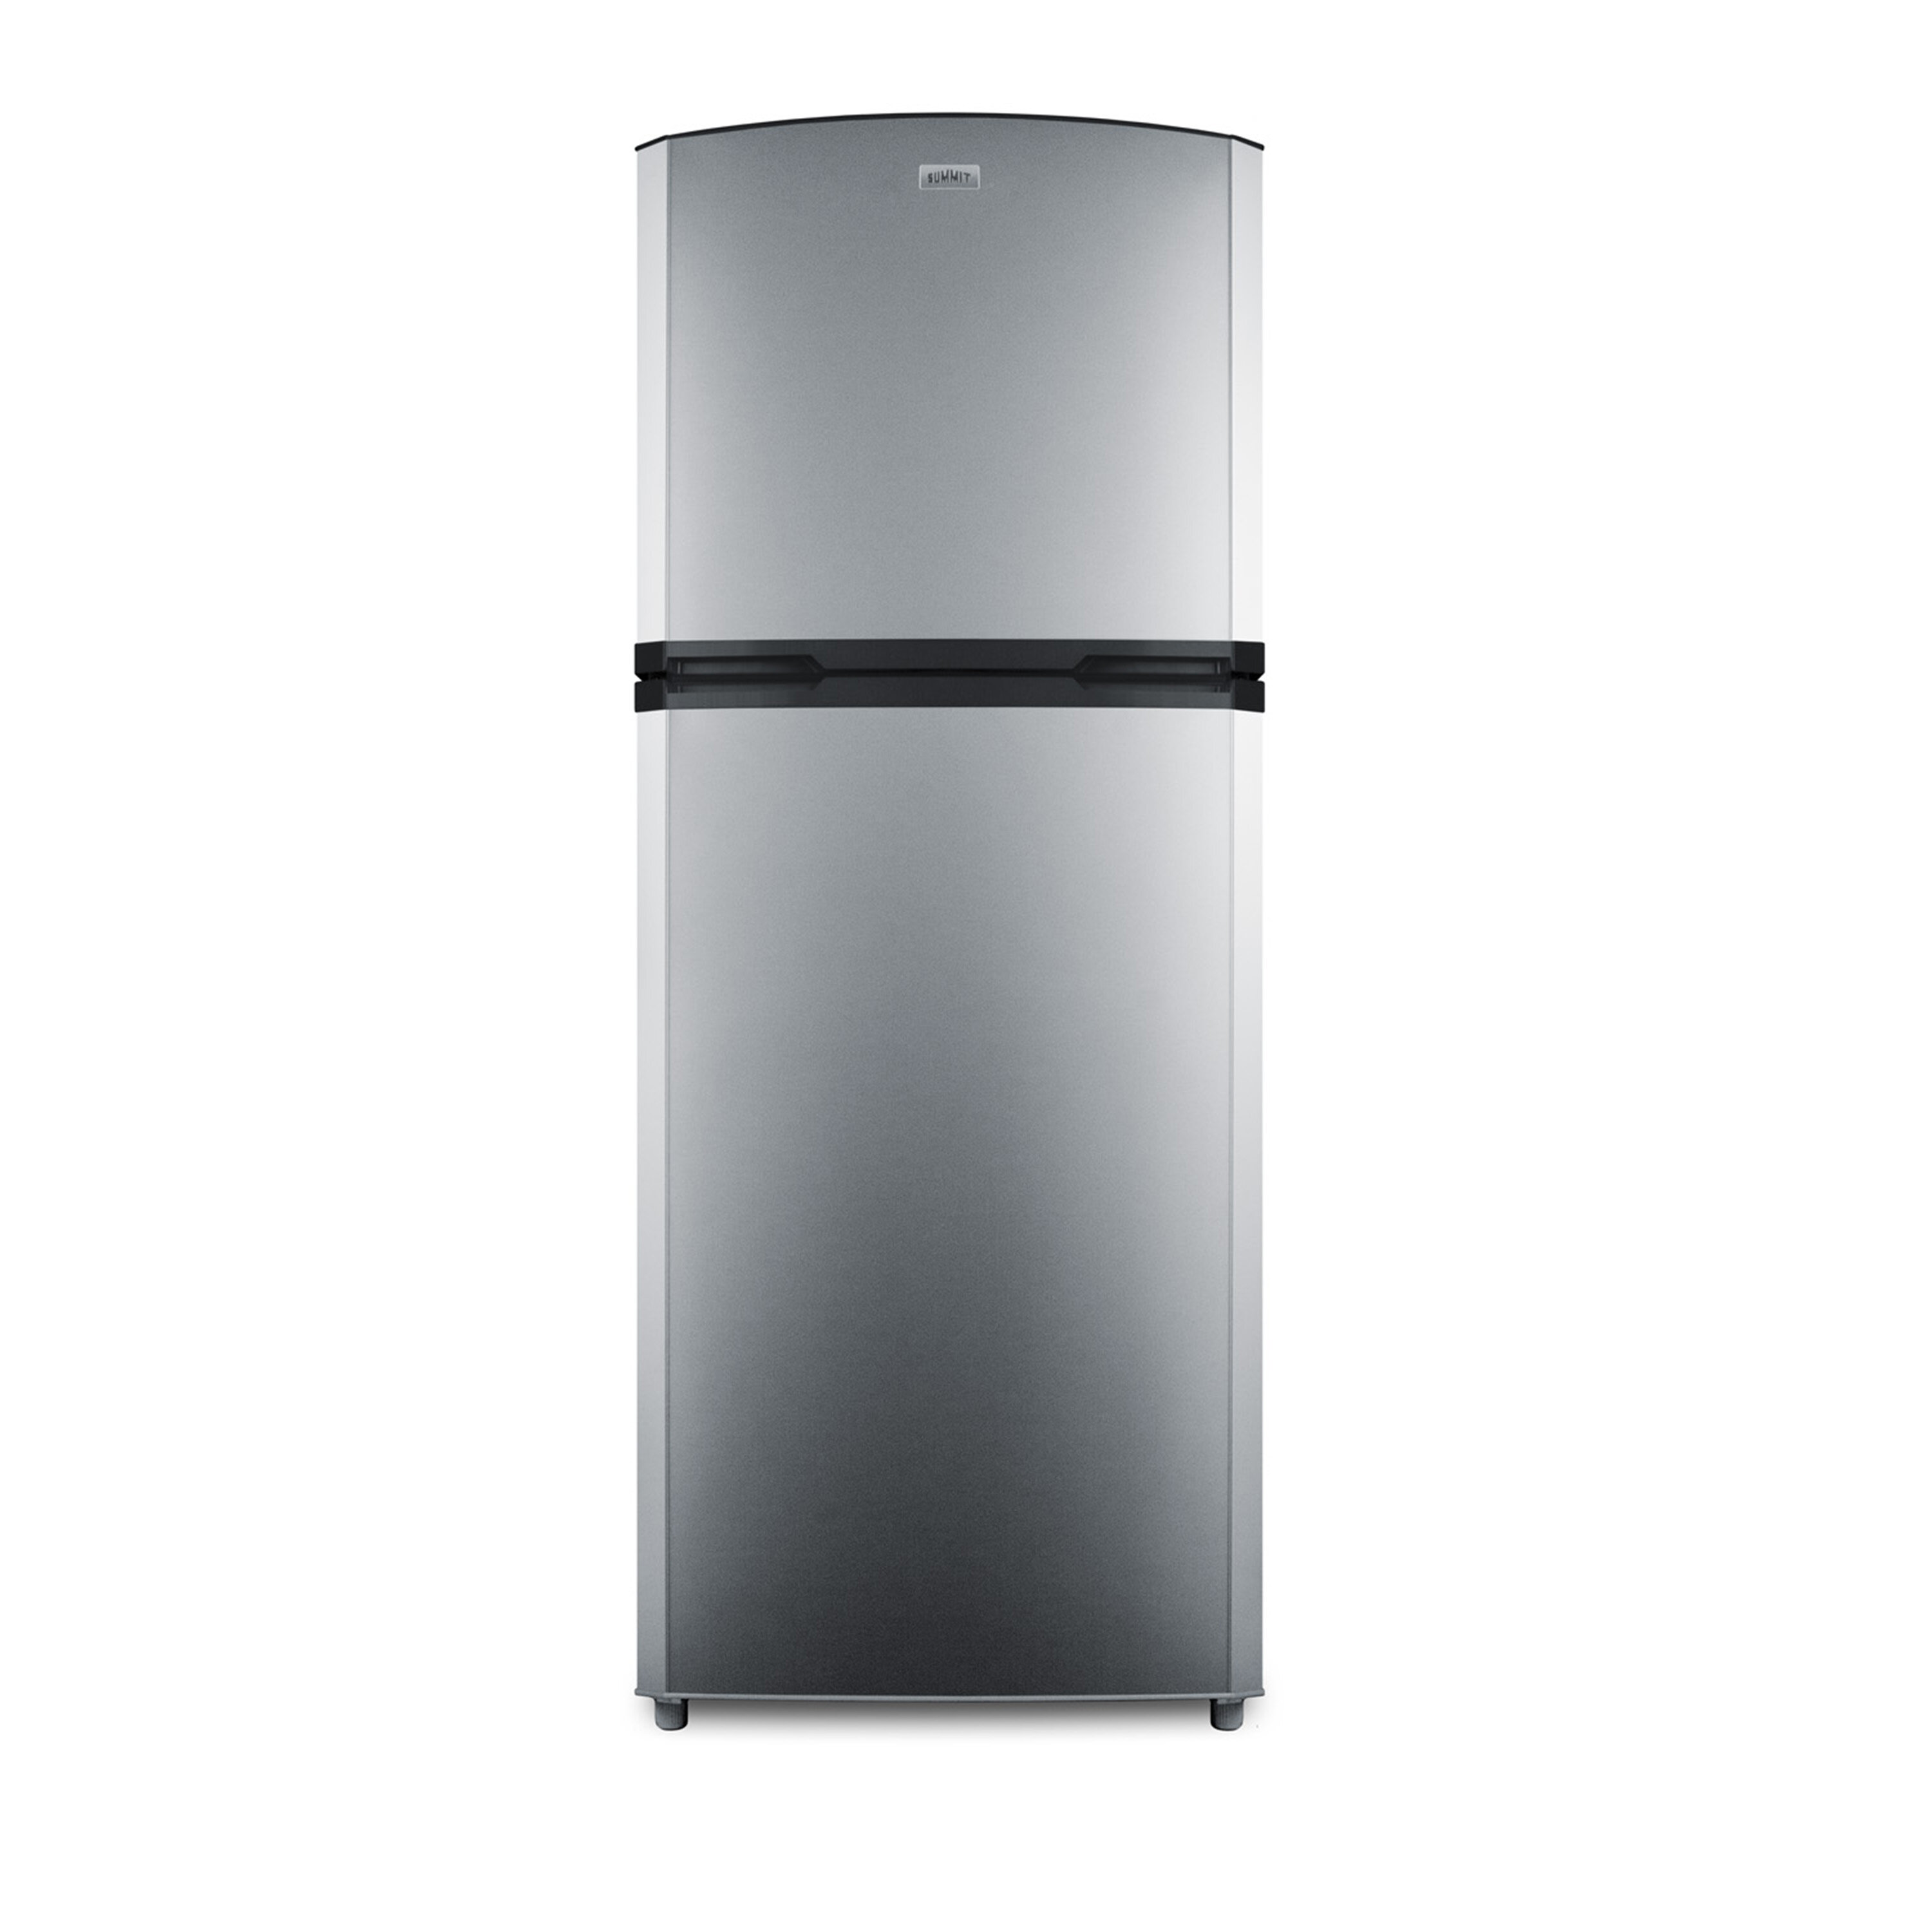 Summit Appliance 26 Wide Top Freezer 12 9 Cu Ft Refrigerator Wayfair,How To Make A Tequila Sunrise With Cranberry Juice